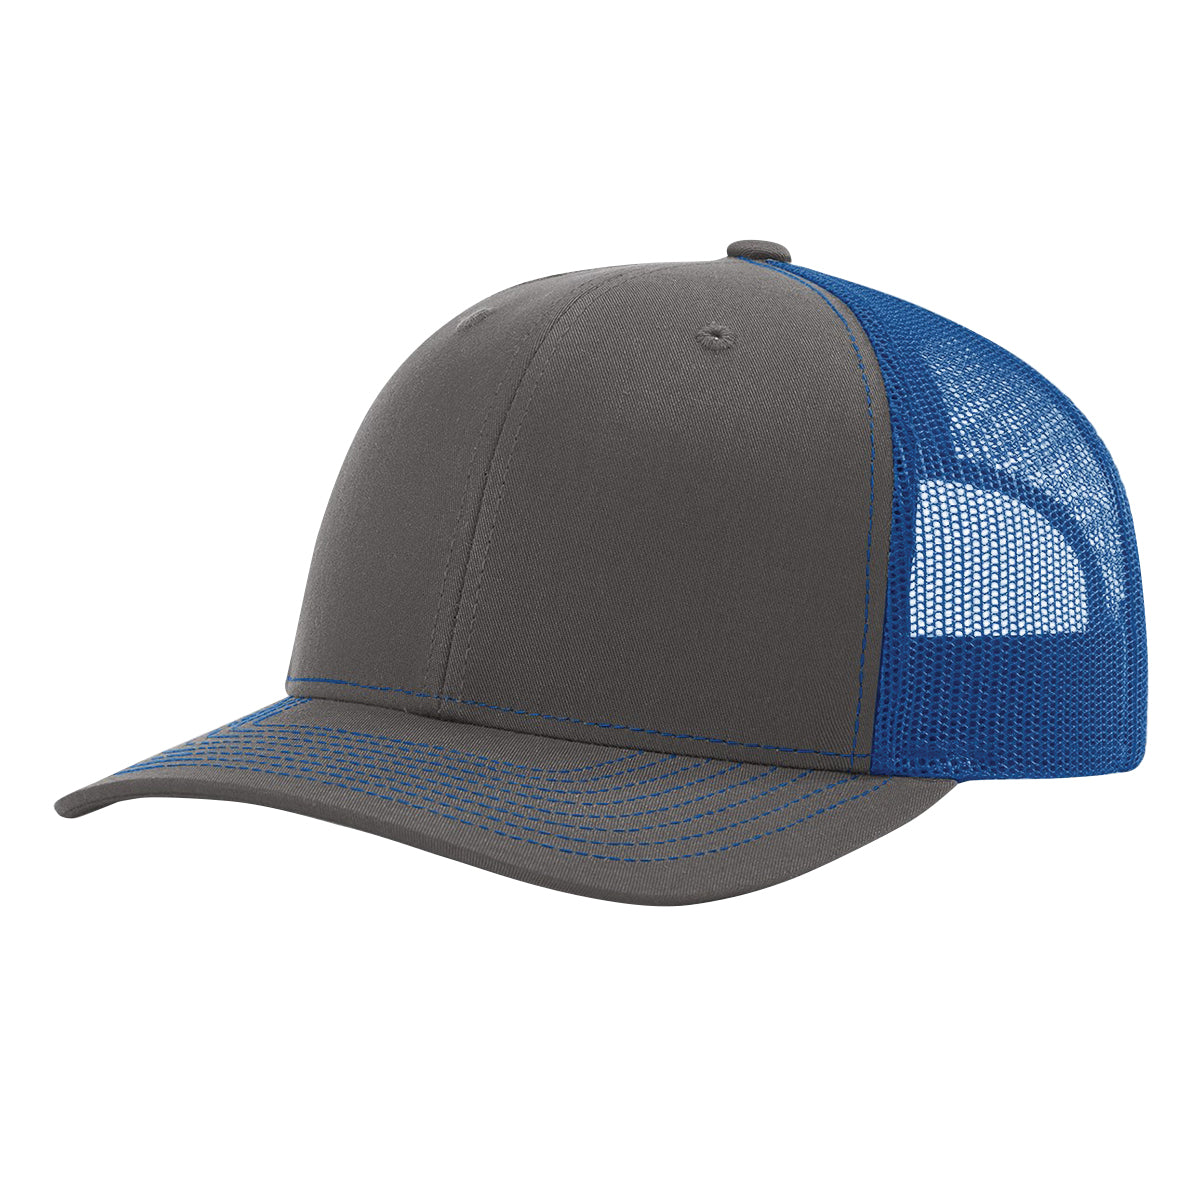 Richardson 112 Customized Trucker Hat with Leather Patch